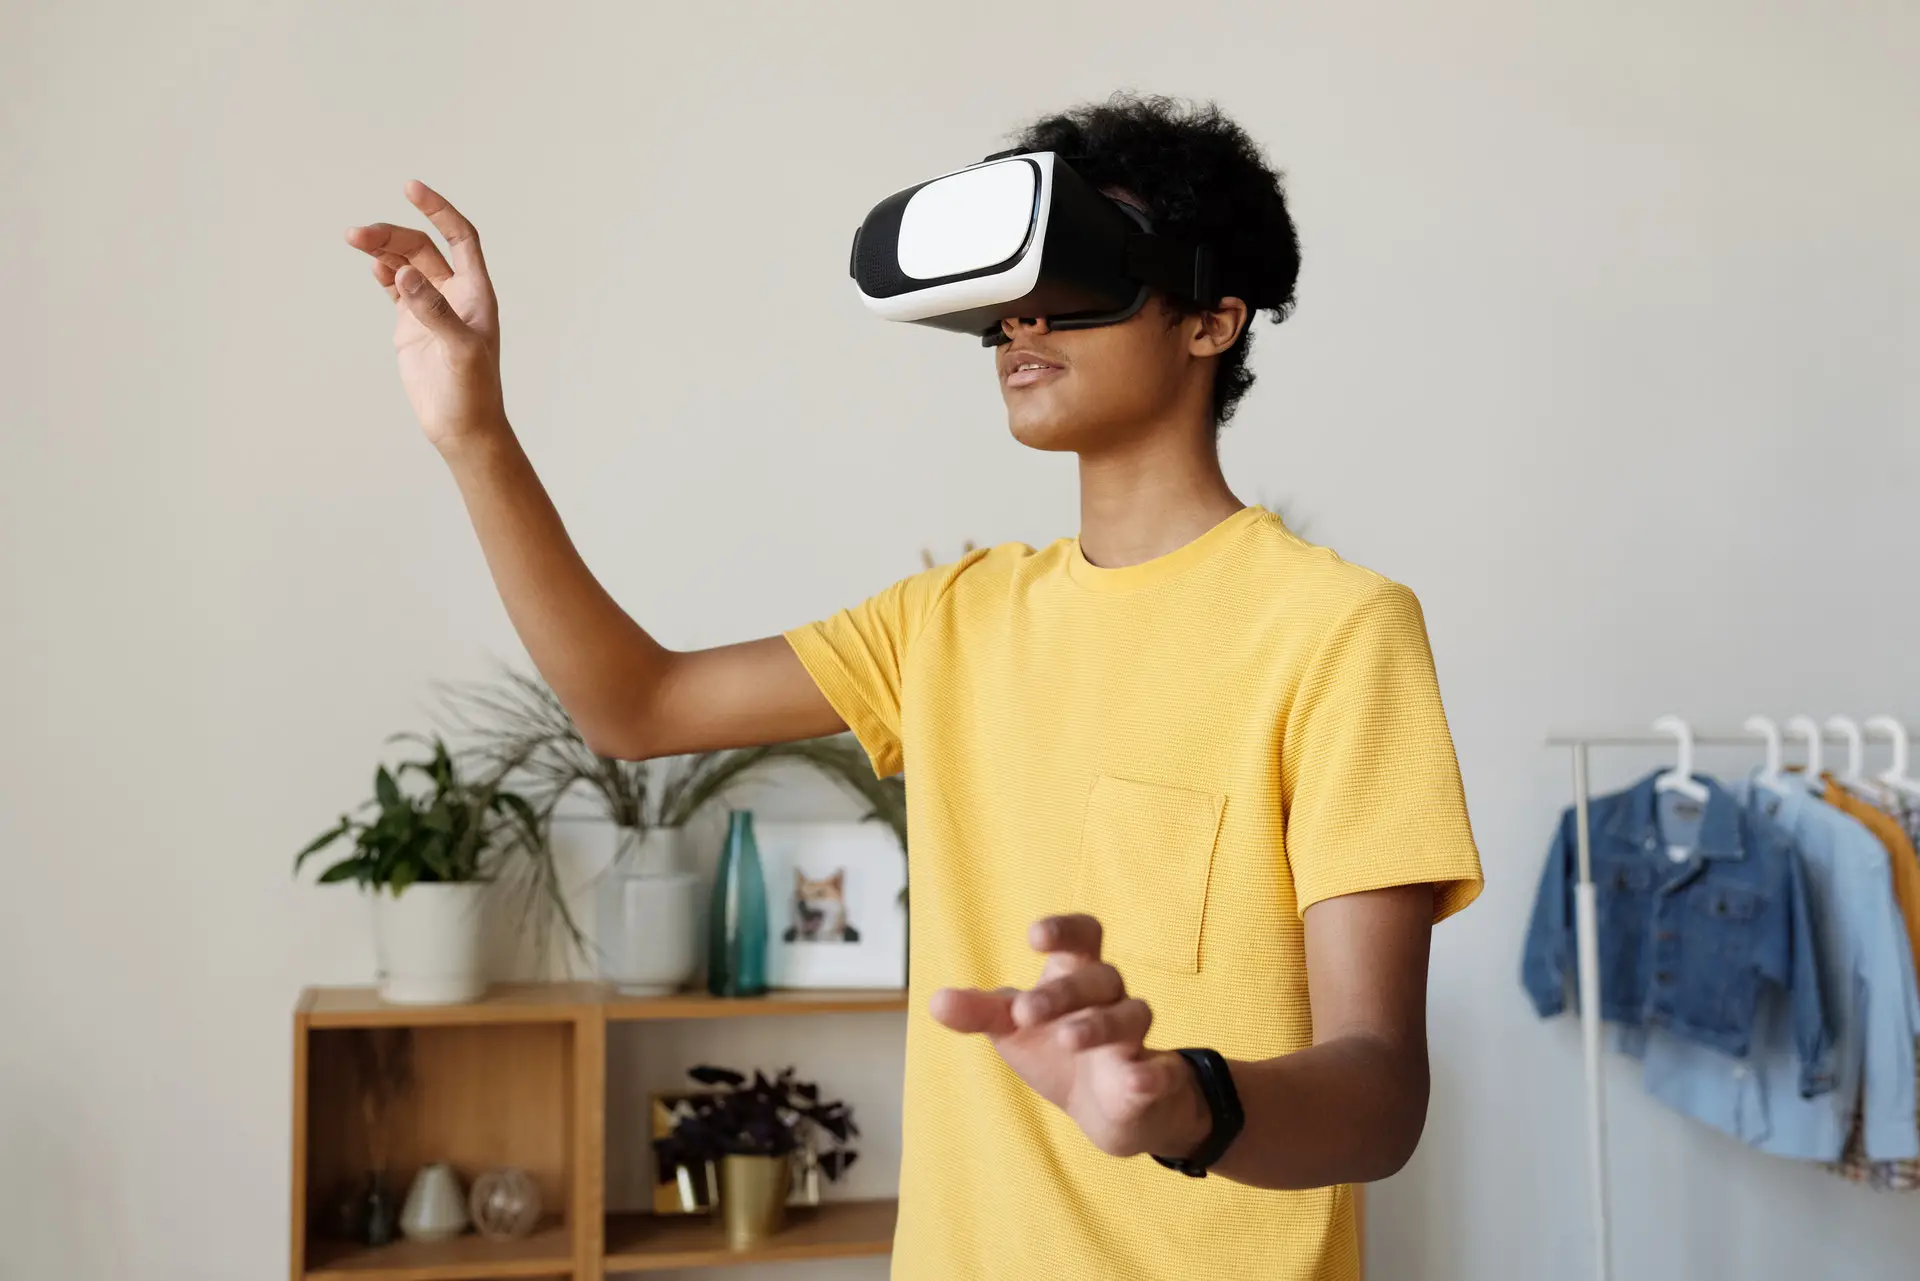 Qualcomm Invests to Set Up XR Labs in Europe to Foster Development for the Metaverse